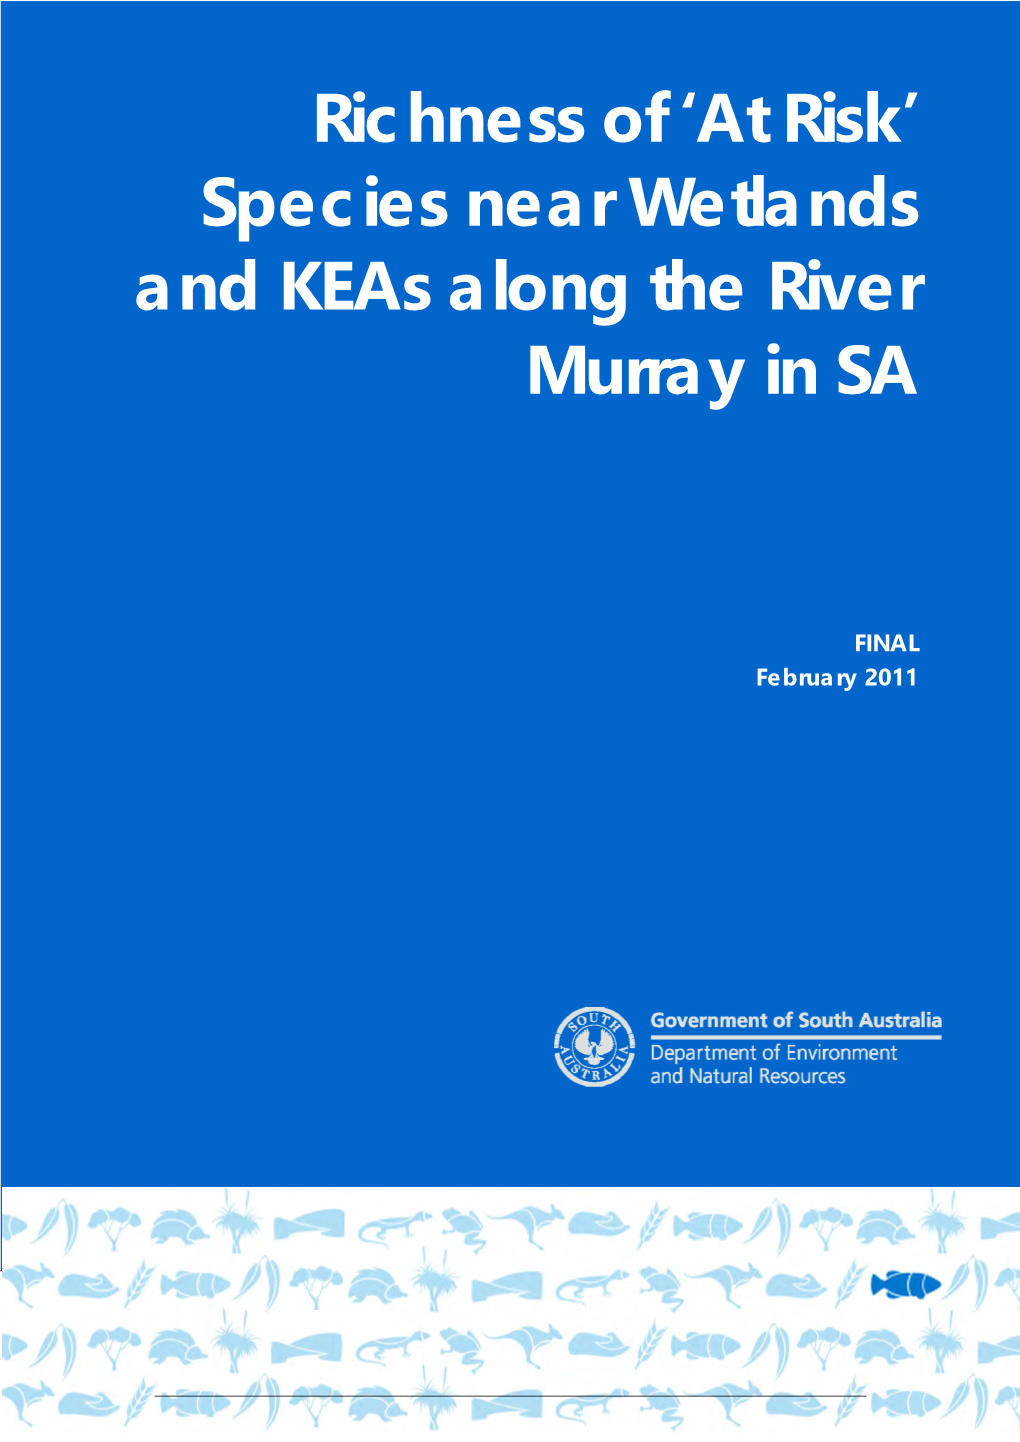 'At Risk' Species Near Wetlands and Keas Along the River Murray in SA